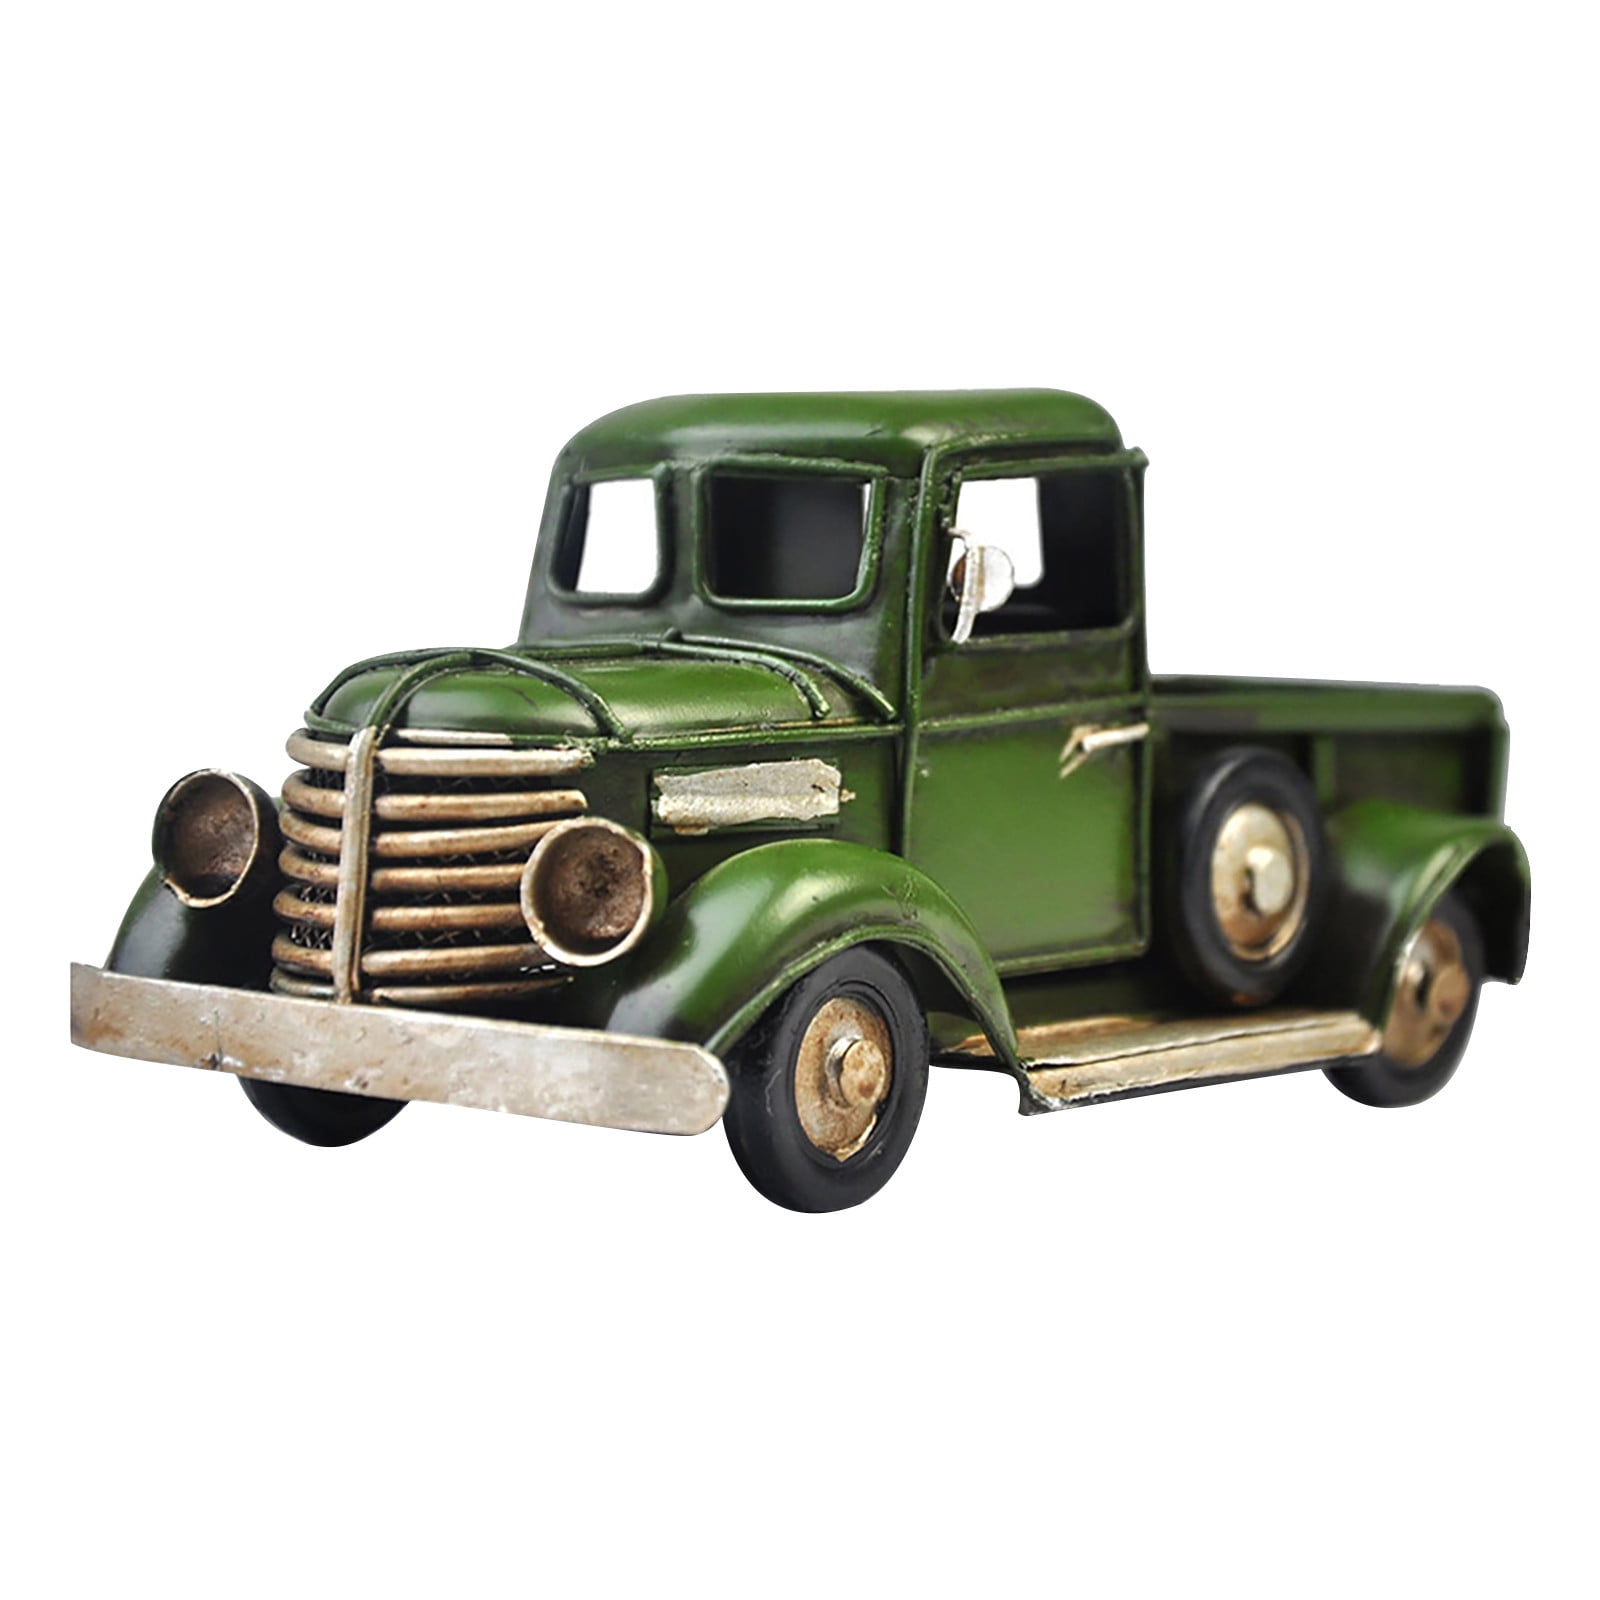 Details about   Red Half Truck Metal Wall Decor